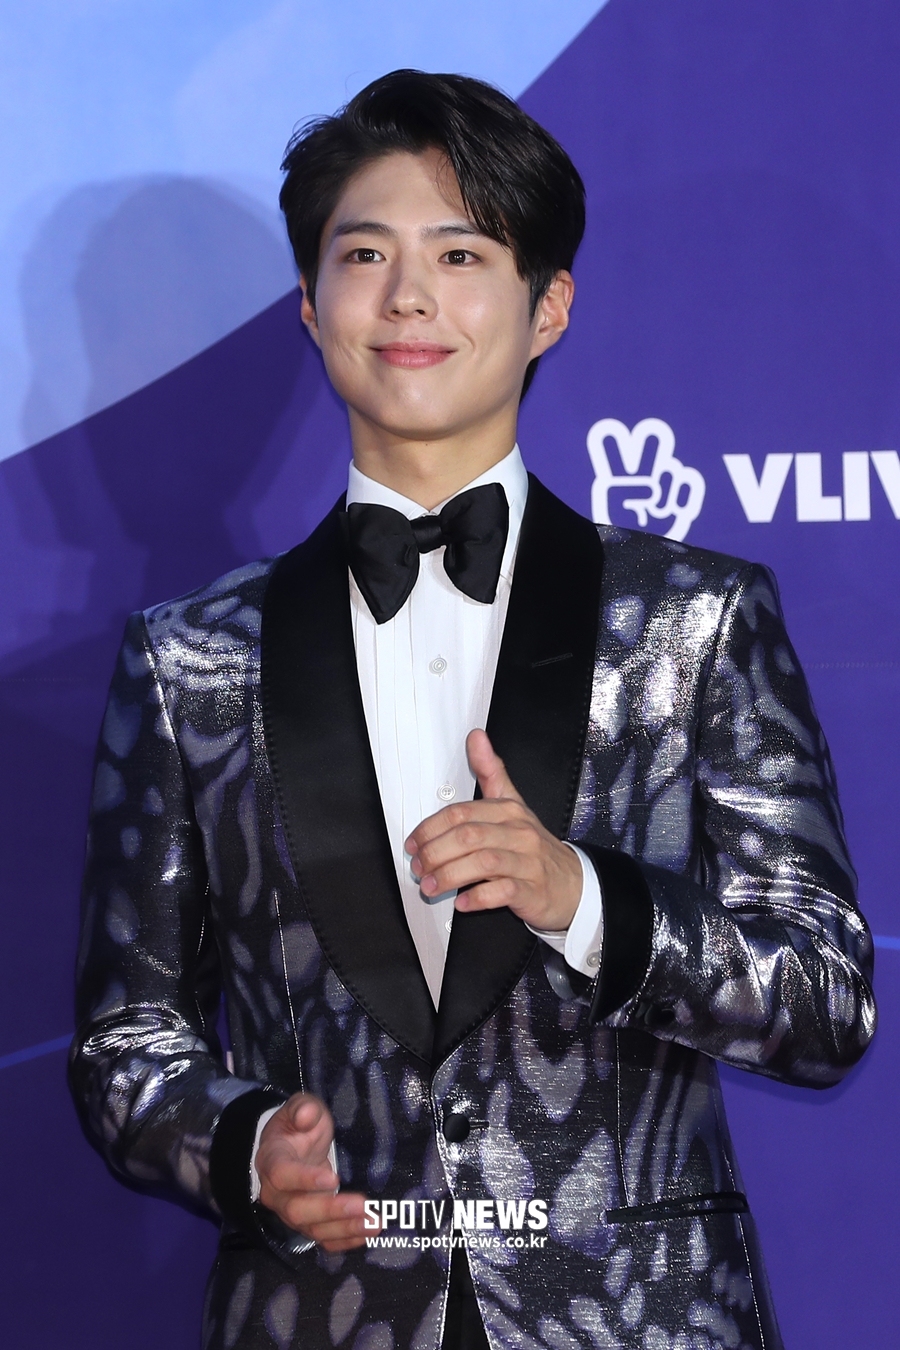 Actor Park Bo-gum appeared on the departure route of Japan with a badge sponsoring Comfort Women Grandmas Boys.Park Bo-gum left for Japan Nagoya through Incheon International Airport on the afternoon of the 3rd.This is for attending the 2019 Mnet Asian Music Awards (hereinafter referred to as MAMA) at Nagoya Dome on the 4th.Park Bo-gums coat, which appeared at the airport on the day, was featured with a marimmond badge sponsoring the Comfort Women victims Grandmas Boys.While the relationship between Korea and Japan is frozen, it was difficult to attend the awards ceremony held in Japan, but it seems that he wanted to convey his message through the badge.CJ ENM held MAMA in Japan in This City, and host Park Bo-gum, who was almost criticized for ITZY, received the attention of domestic fans and turned such a glance into applause through badge.Of course, Park Bo-gum is well known for its steady wear of marimmond products, and has been exposed to Zazu through broadcasting.However, this time was not only a time, but also it was a situation that could be considered to be exposed through the media when leaving for MAMA.At this time, wearing this badge with clear meaning is interpreted as the Xiao Xin expression more than the coincidence in the silent.Park Bo-gum has appeared for the third consecutive year since last years attendance at MAMA in 2017.It has been a good host in the past two events and has been popular in Japan as well.This year, we expect to lead the event with excellent progress.=